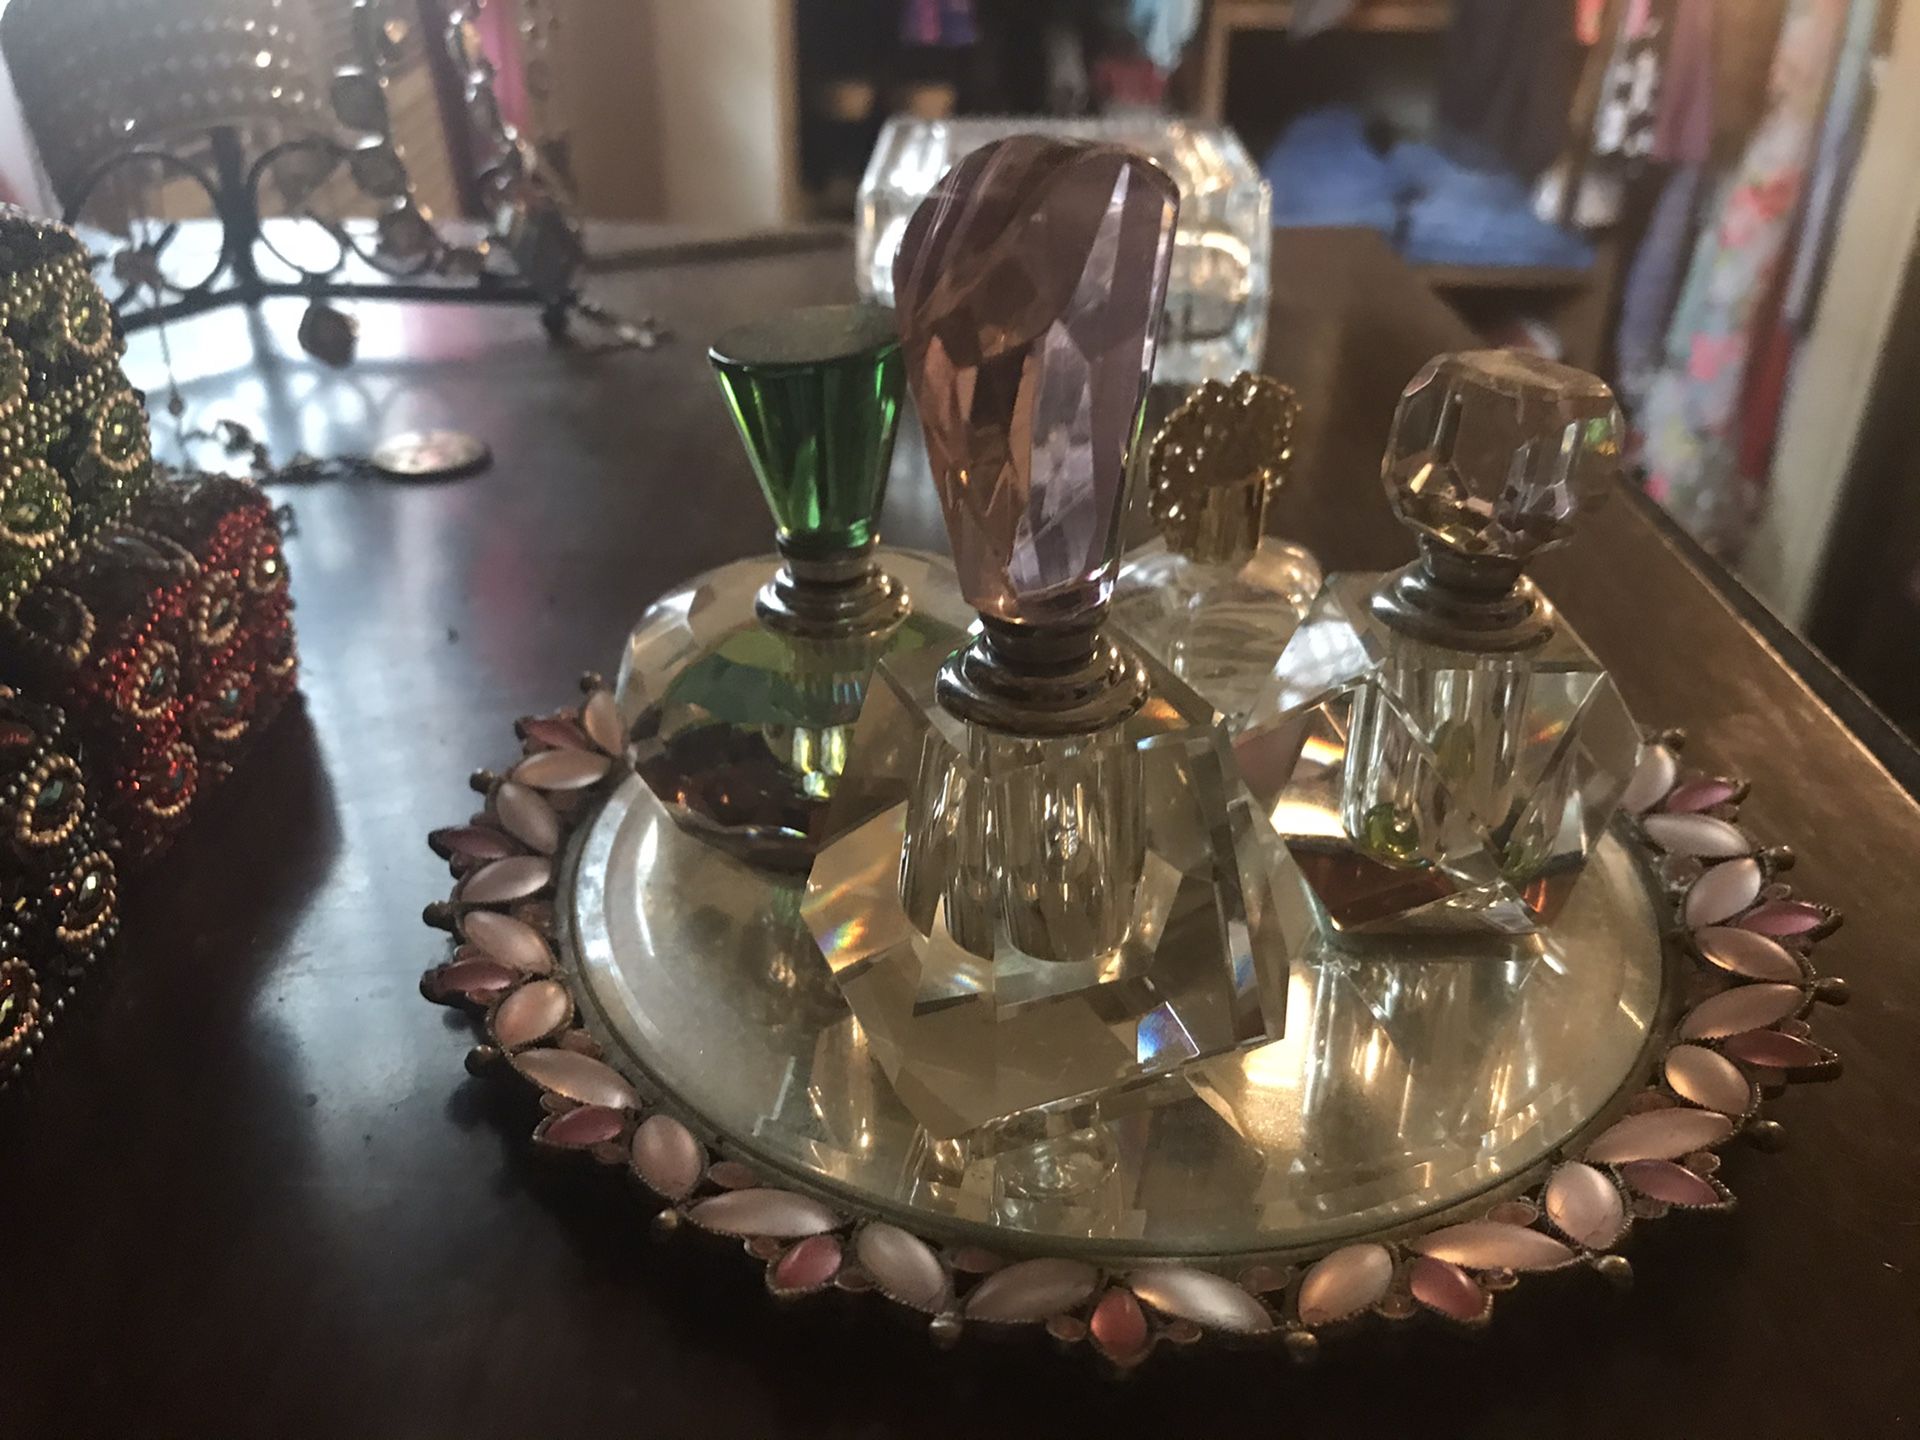 Antique style perfume bottles on glass plate